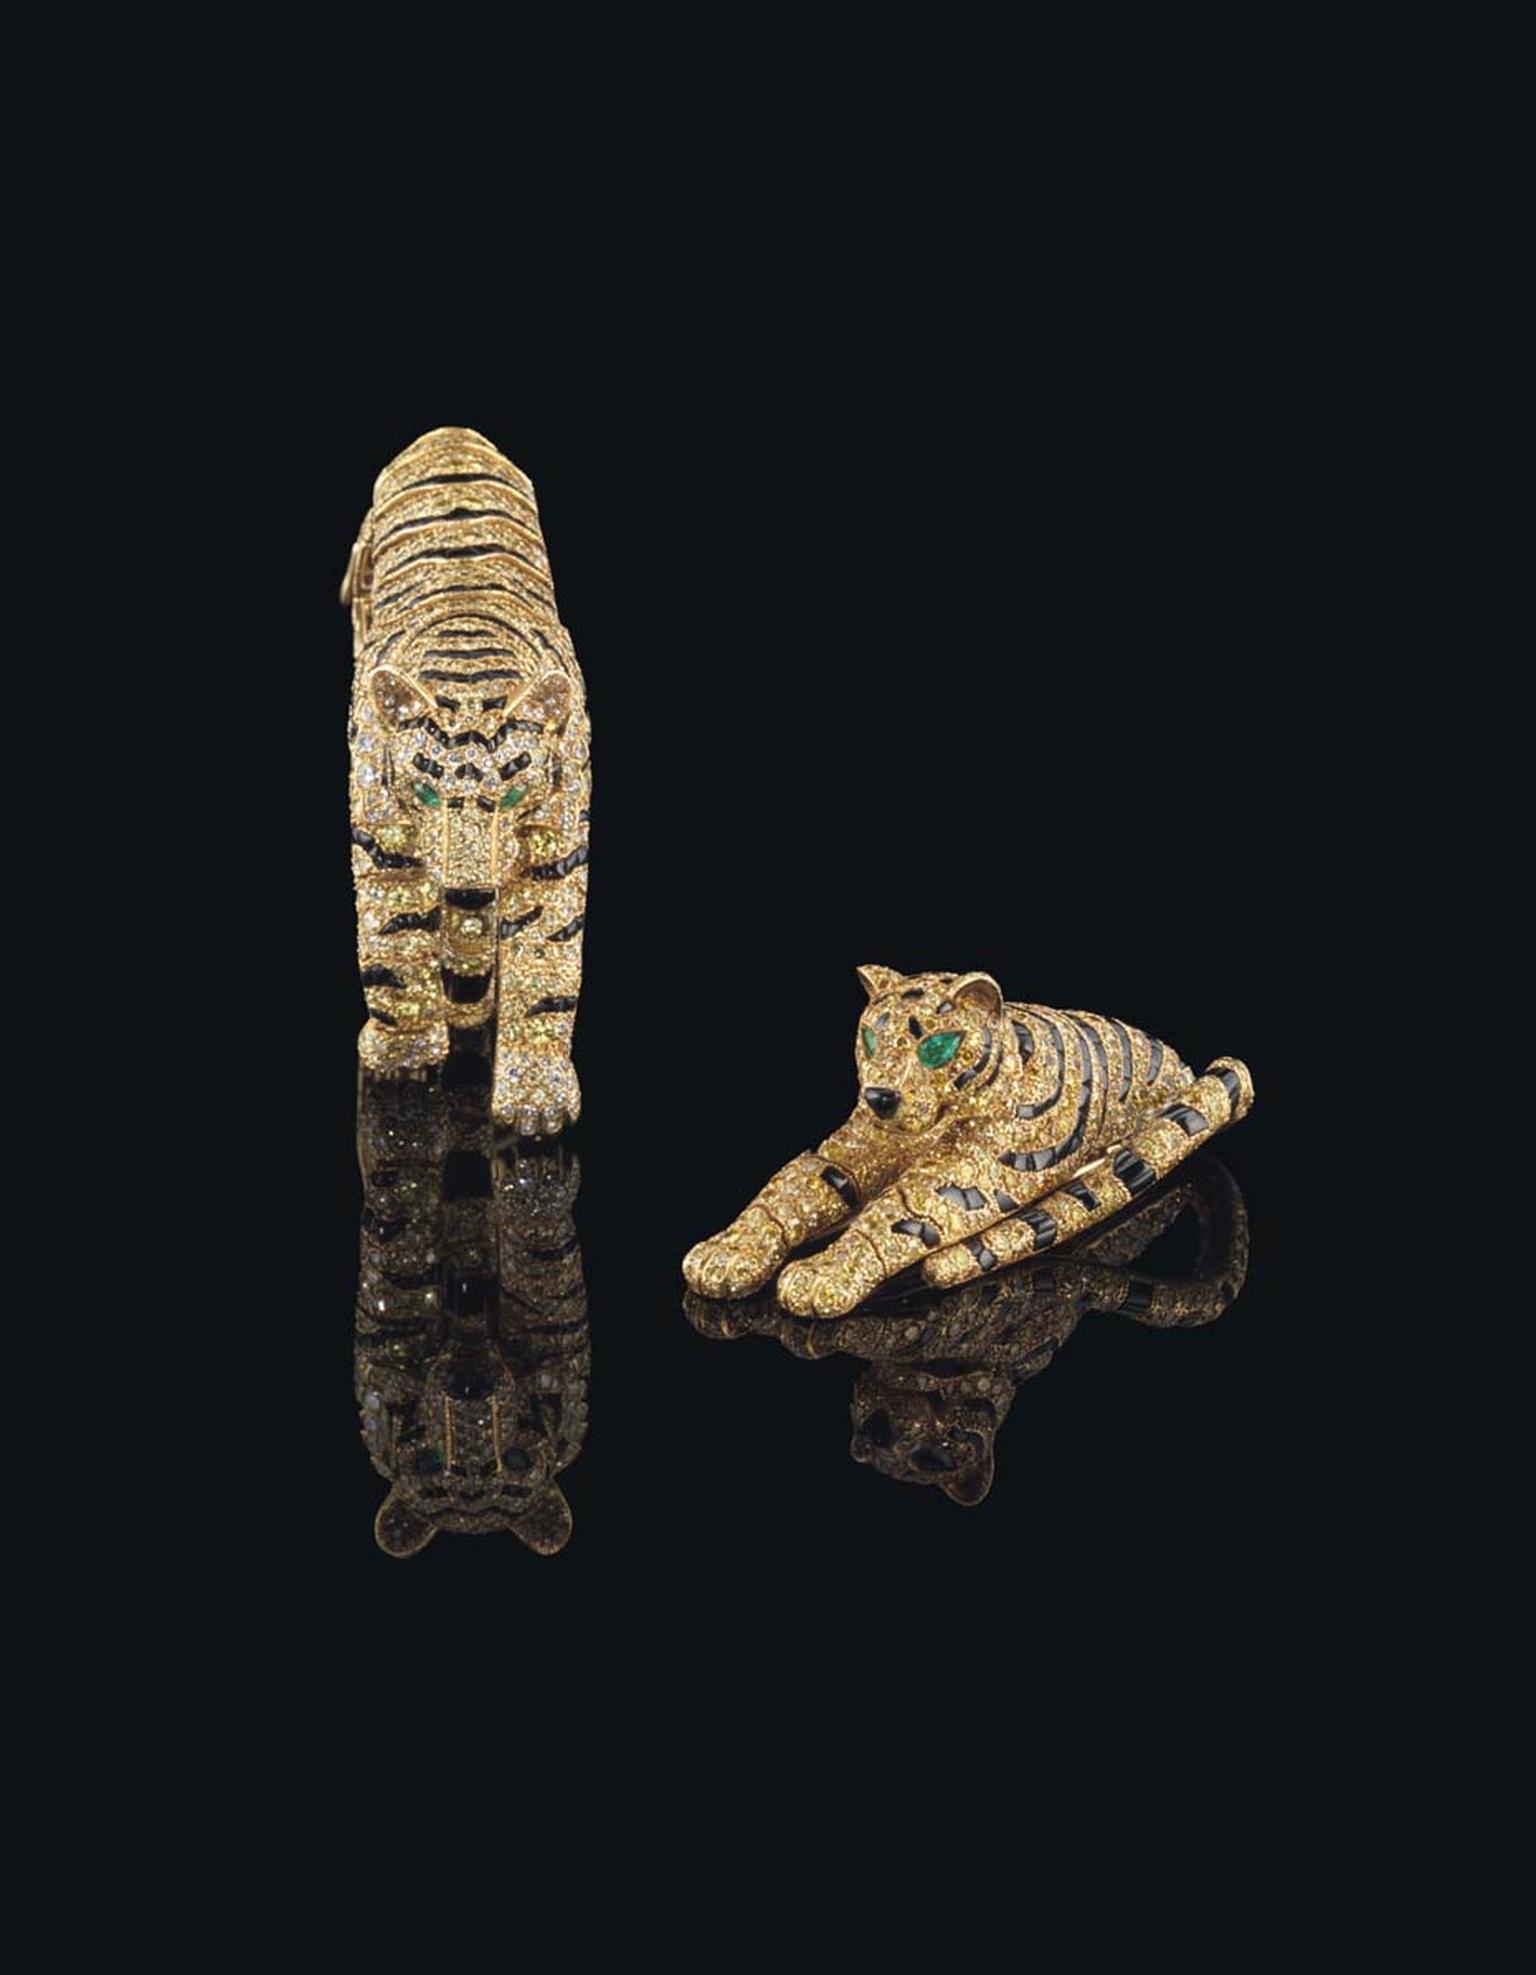 A Cartier Tiger brooch and bracelet with diamonds, onyx and emeralds, once owned by the Duchess of Windsor, sold for $3.14 million at Christie's Geneva after a tense bidding battle between collectors both on the phone and in the auction room.